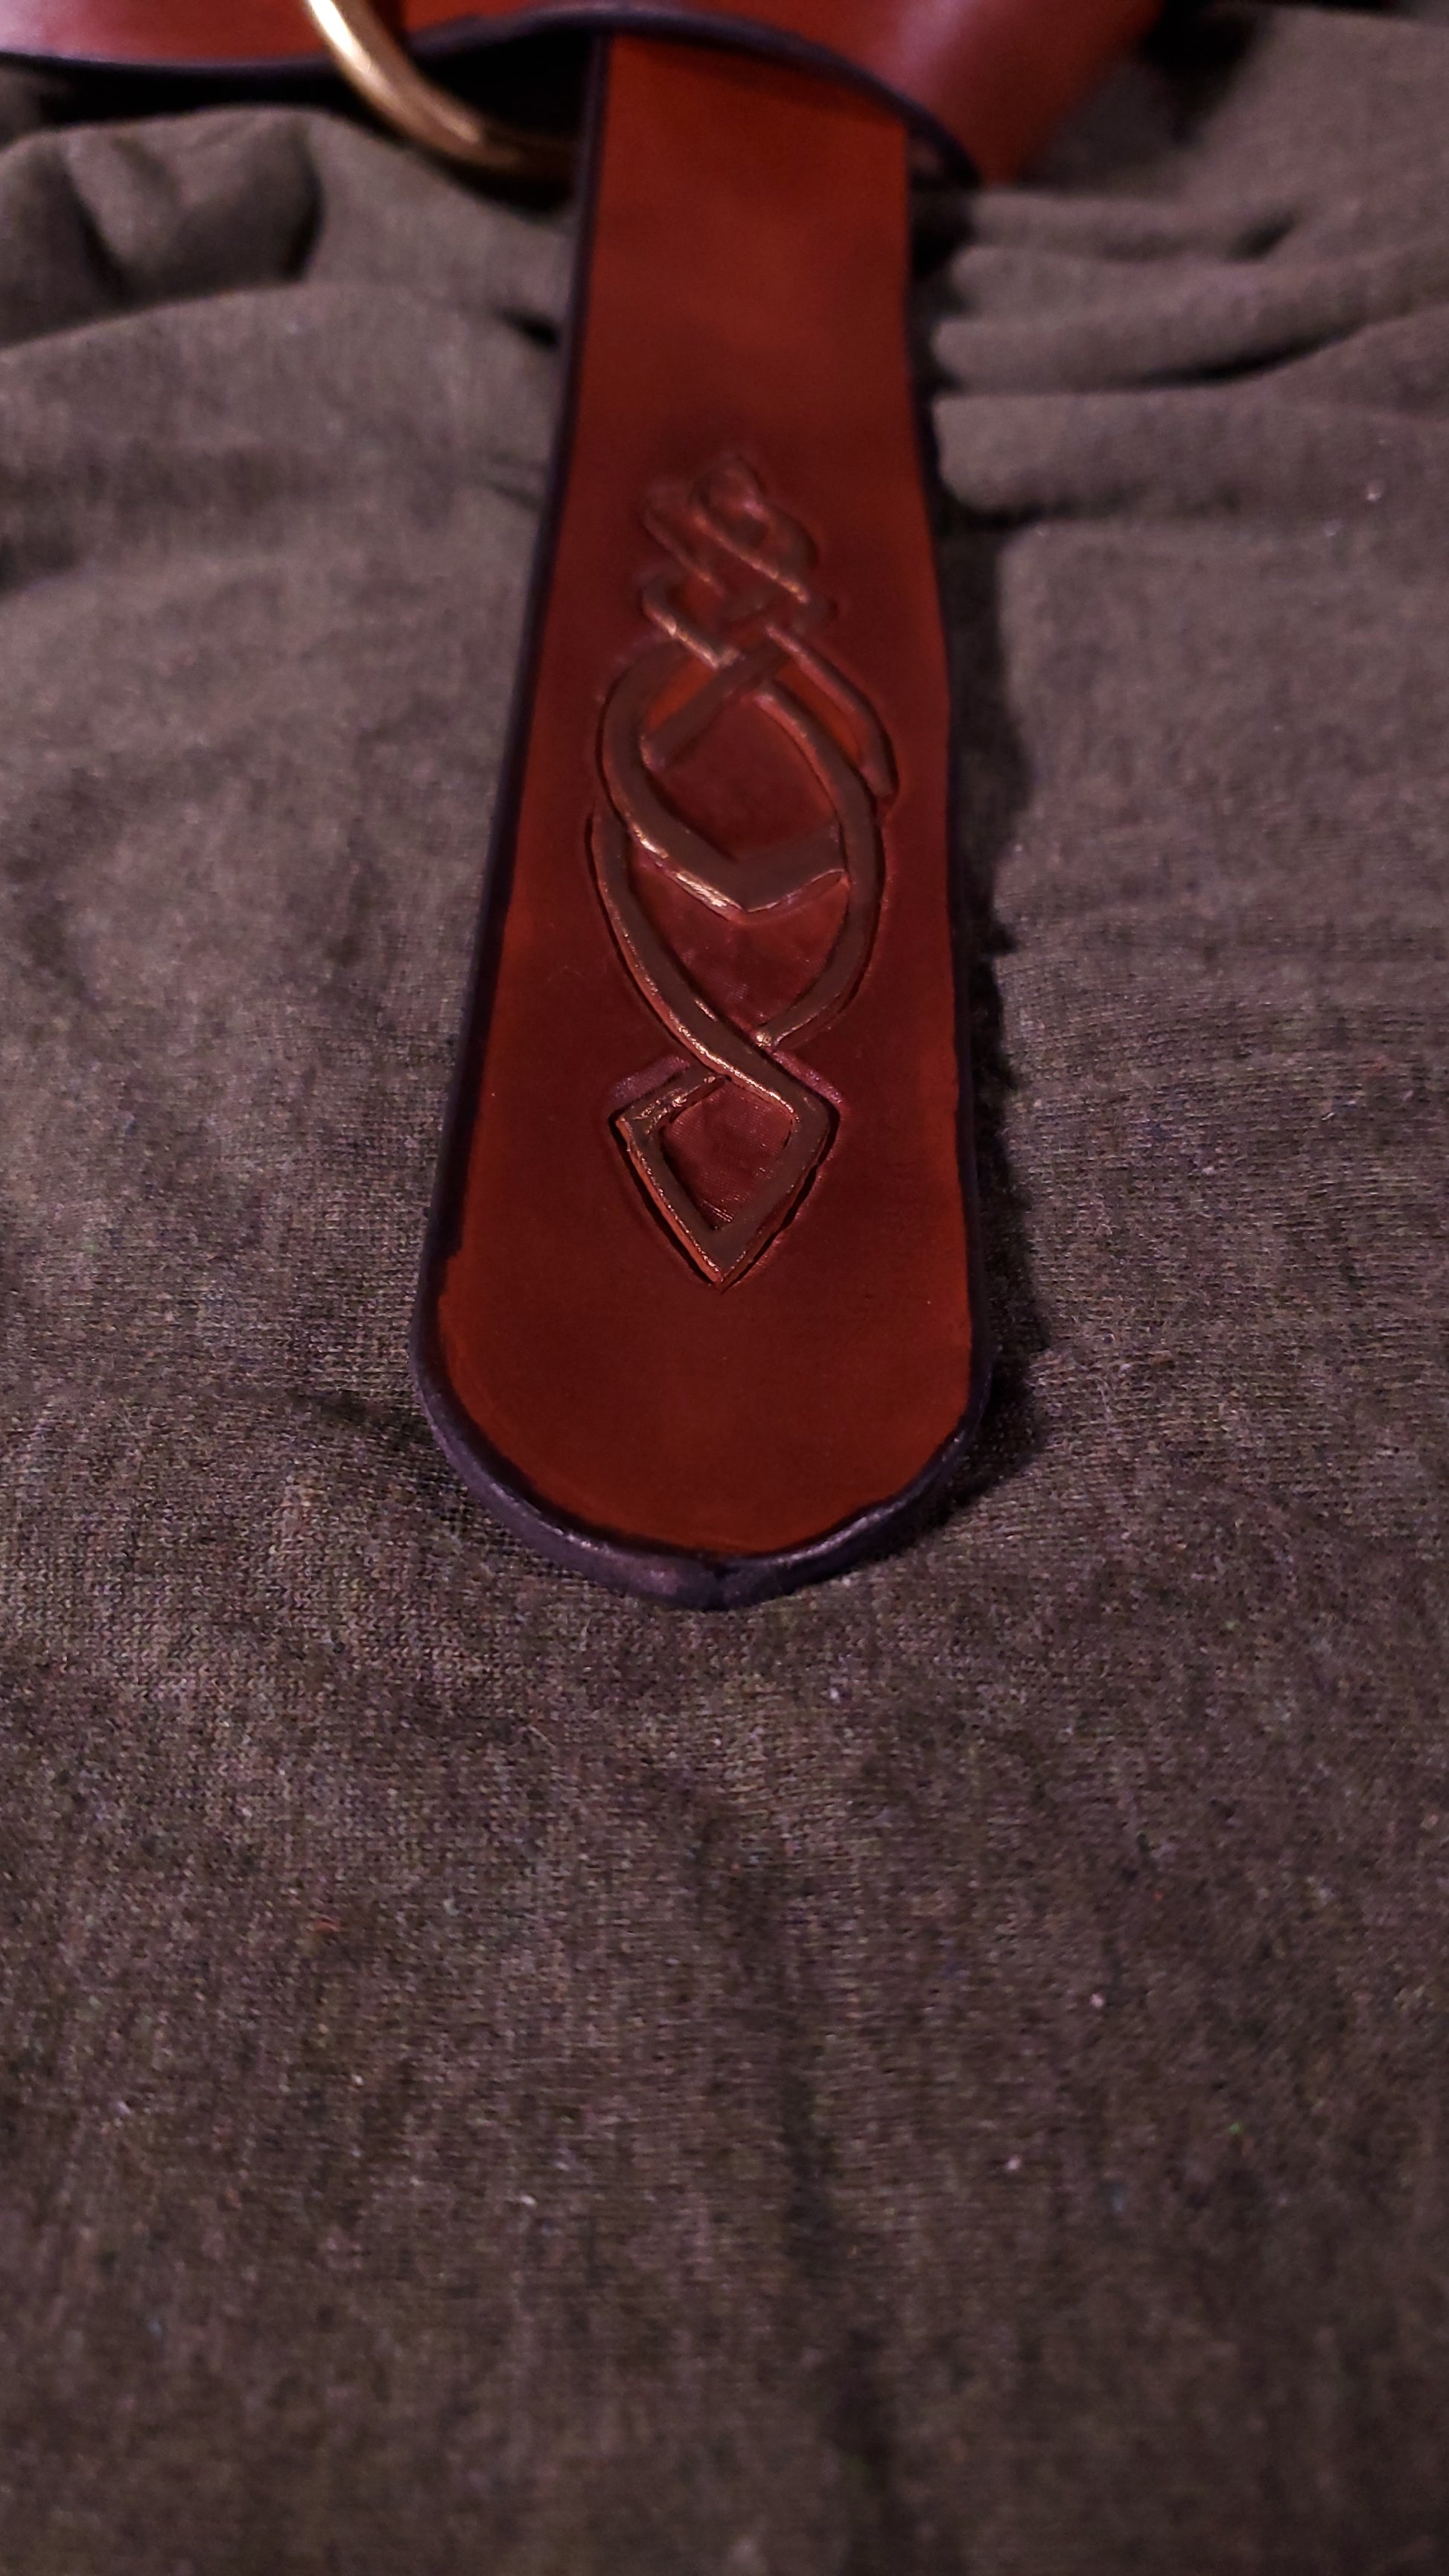 Close up of the tooling on the tip of the belt showing a celtic knot design